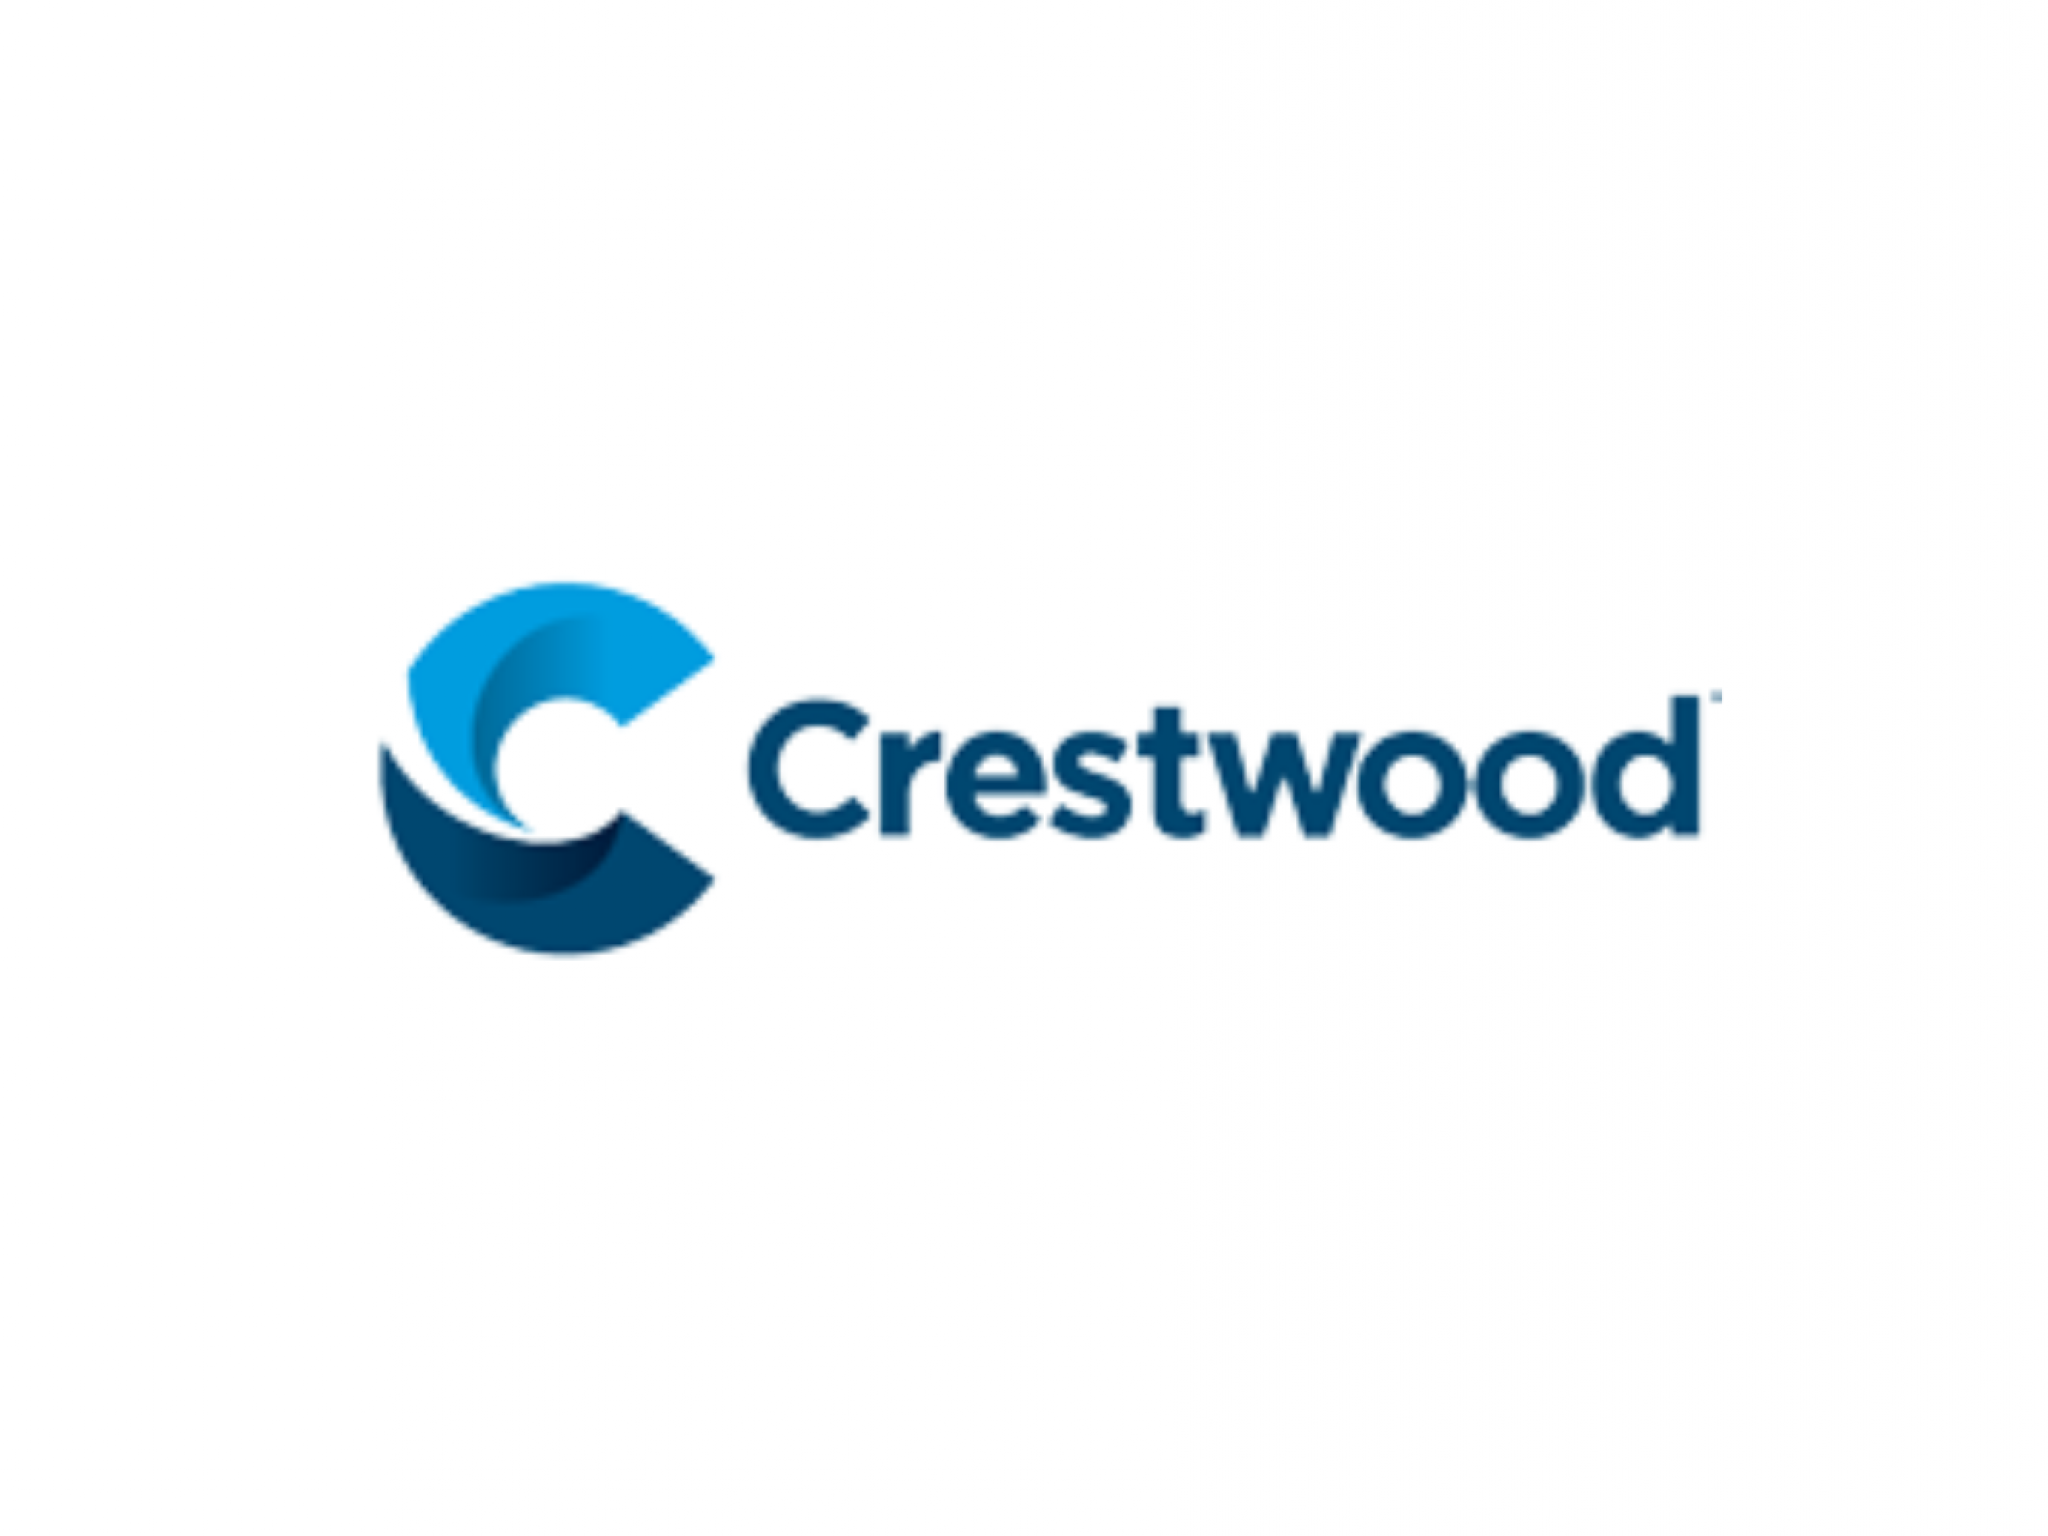  energy-transfer-inks-71b-deal-to-acquire-crestwood-equity-partners 